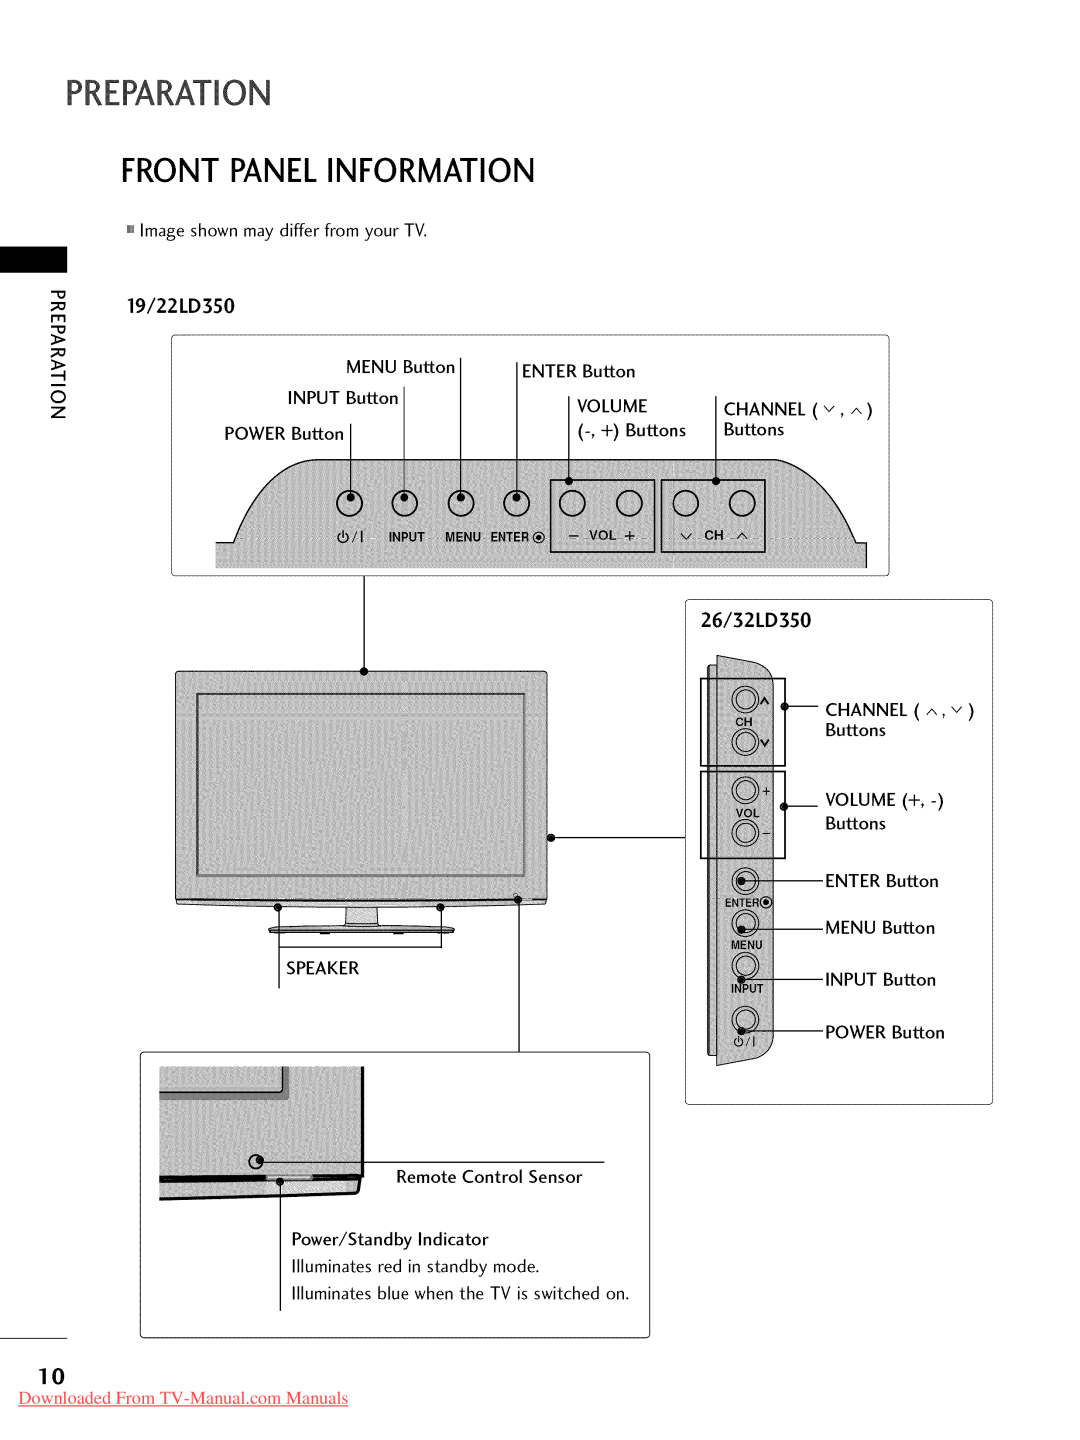 LG Electronics 42LD520 Preparation Frontpanelinformation, Downloaded From TV-Manual.com Manuals, 19/22LD350, Channel 